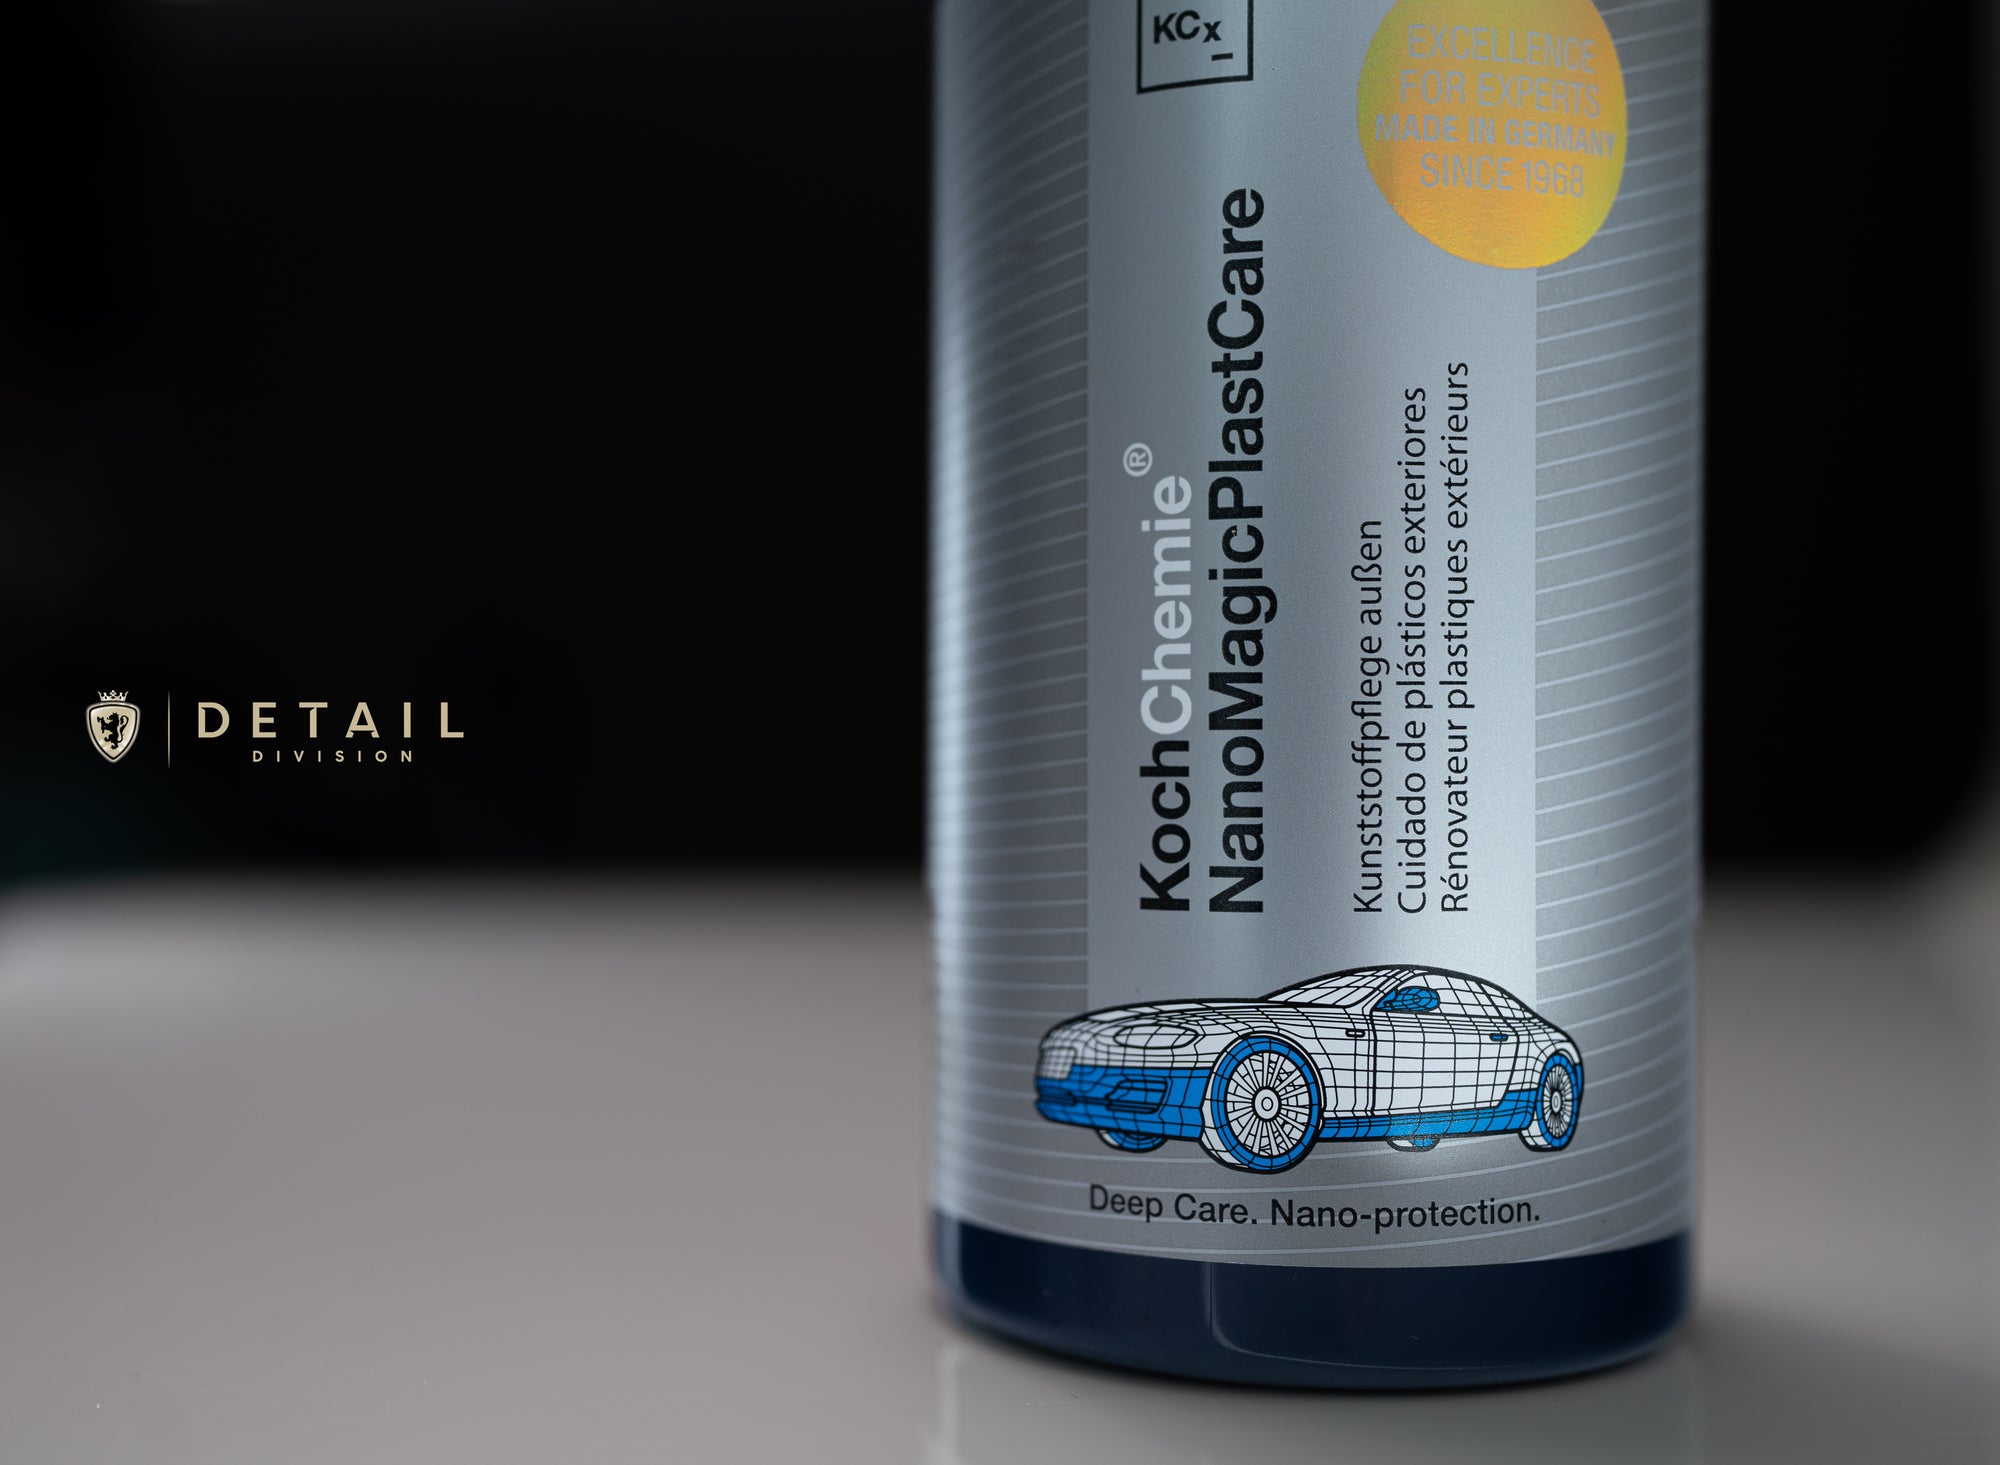 Engine Bay Cleaning: How To with KCX.  Koch-Chemie ExcellenceForExperts. 